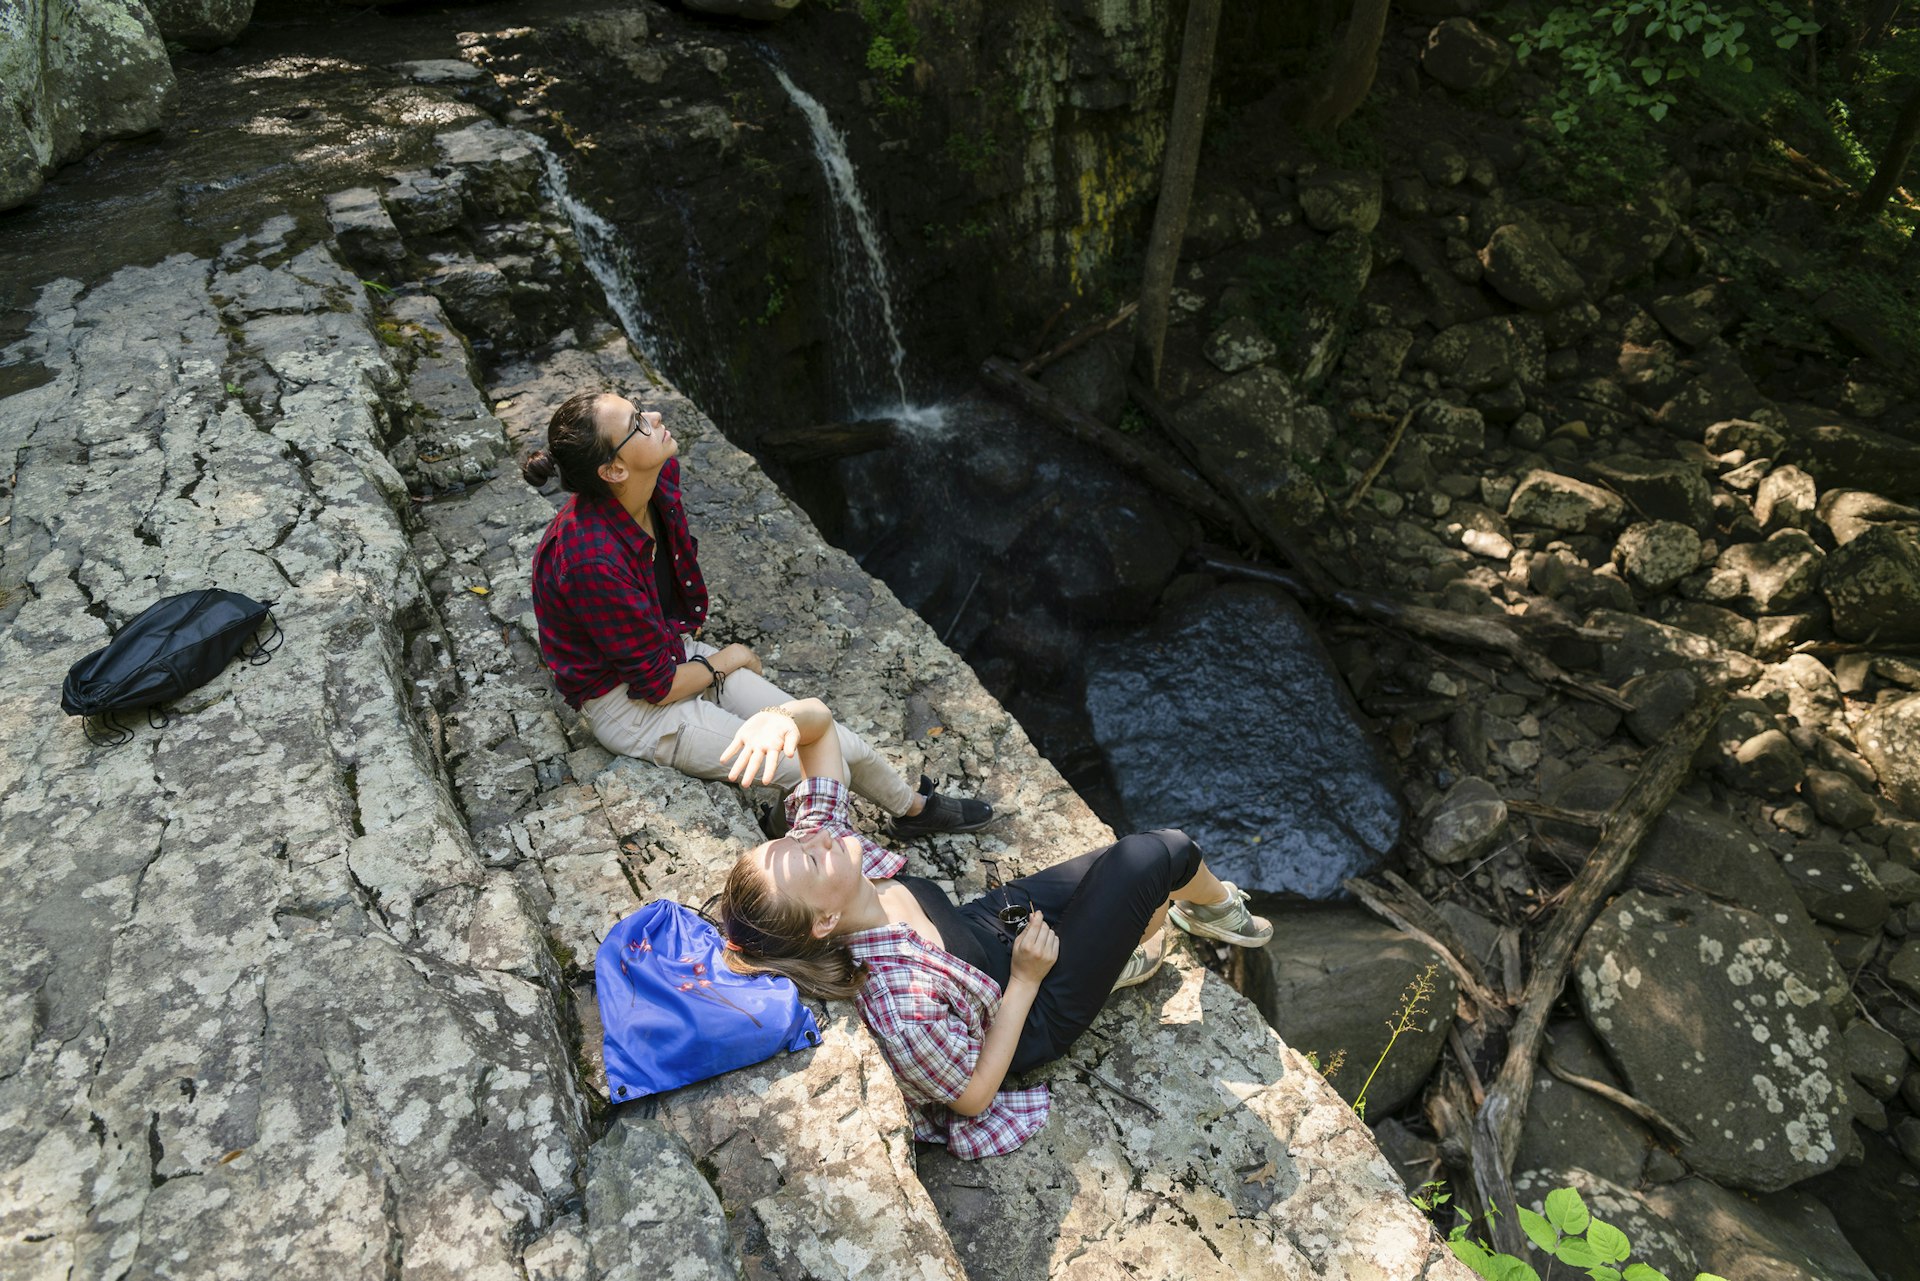 Two teenage girls resting at the top of the rock nearby Dinging Rocks waterfall, Upper Black Eddy, Pennsylvania, Poconos, USA